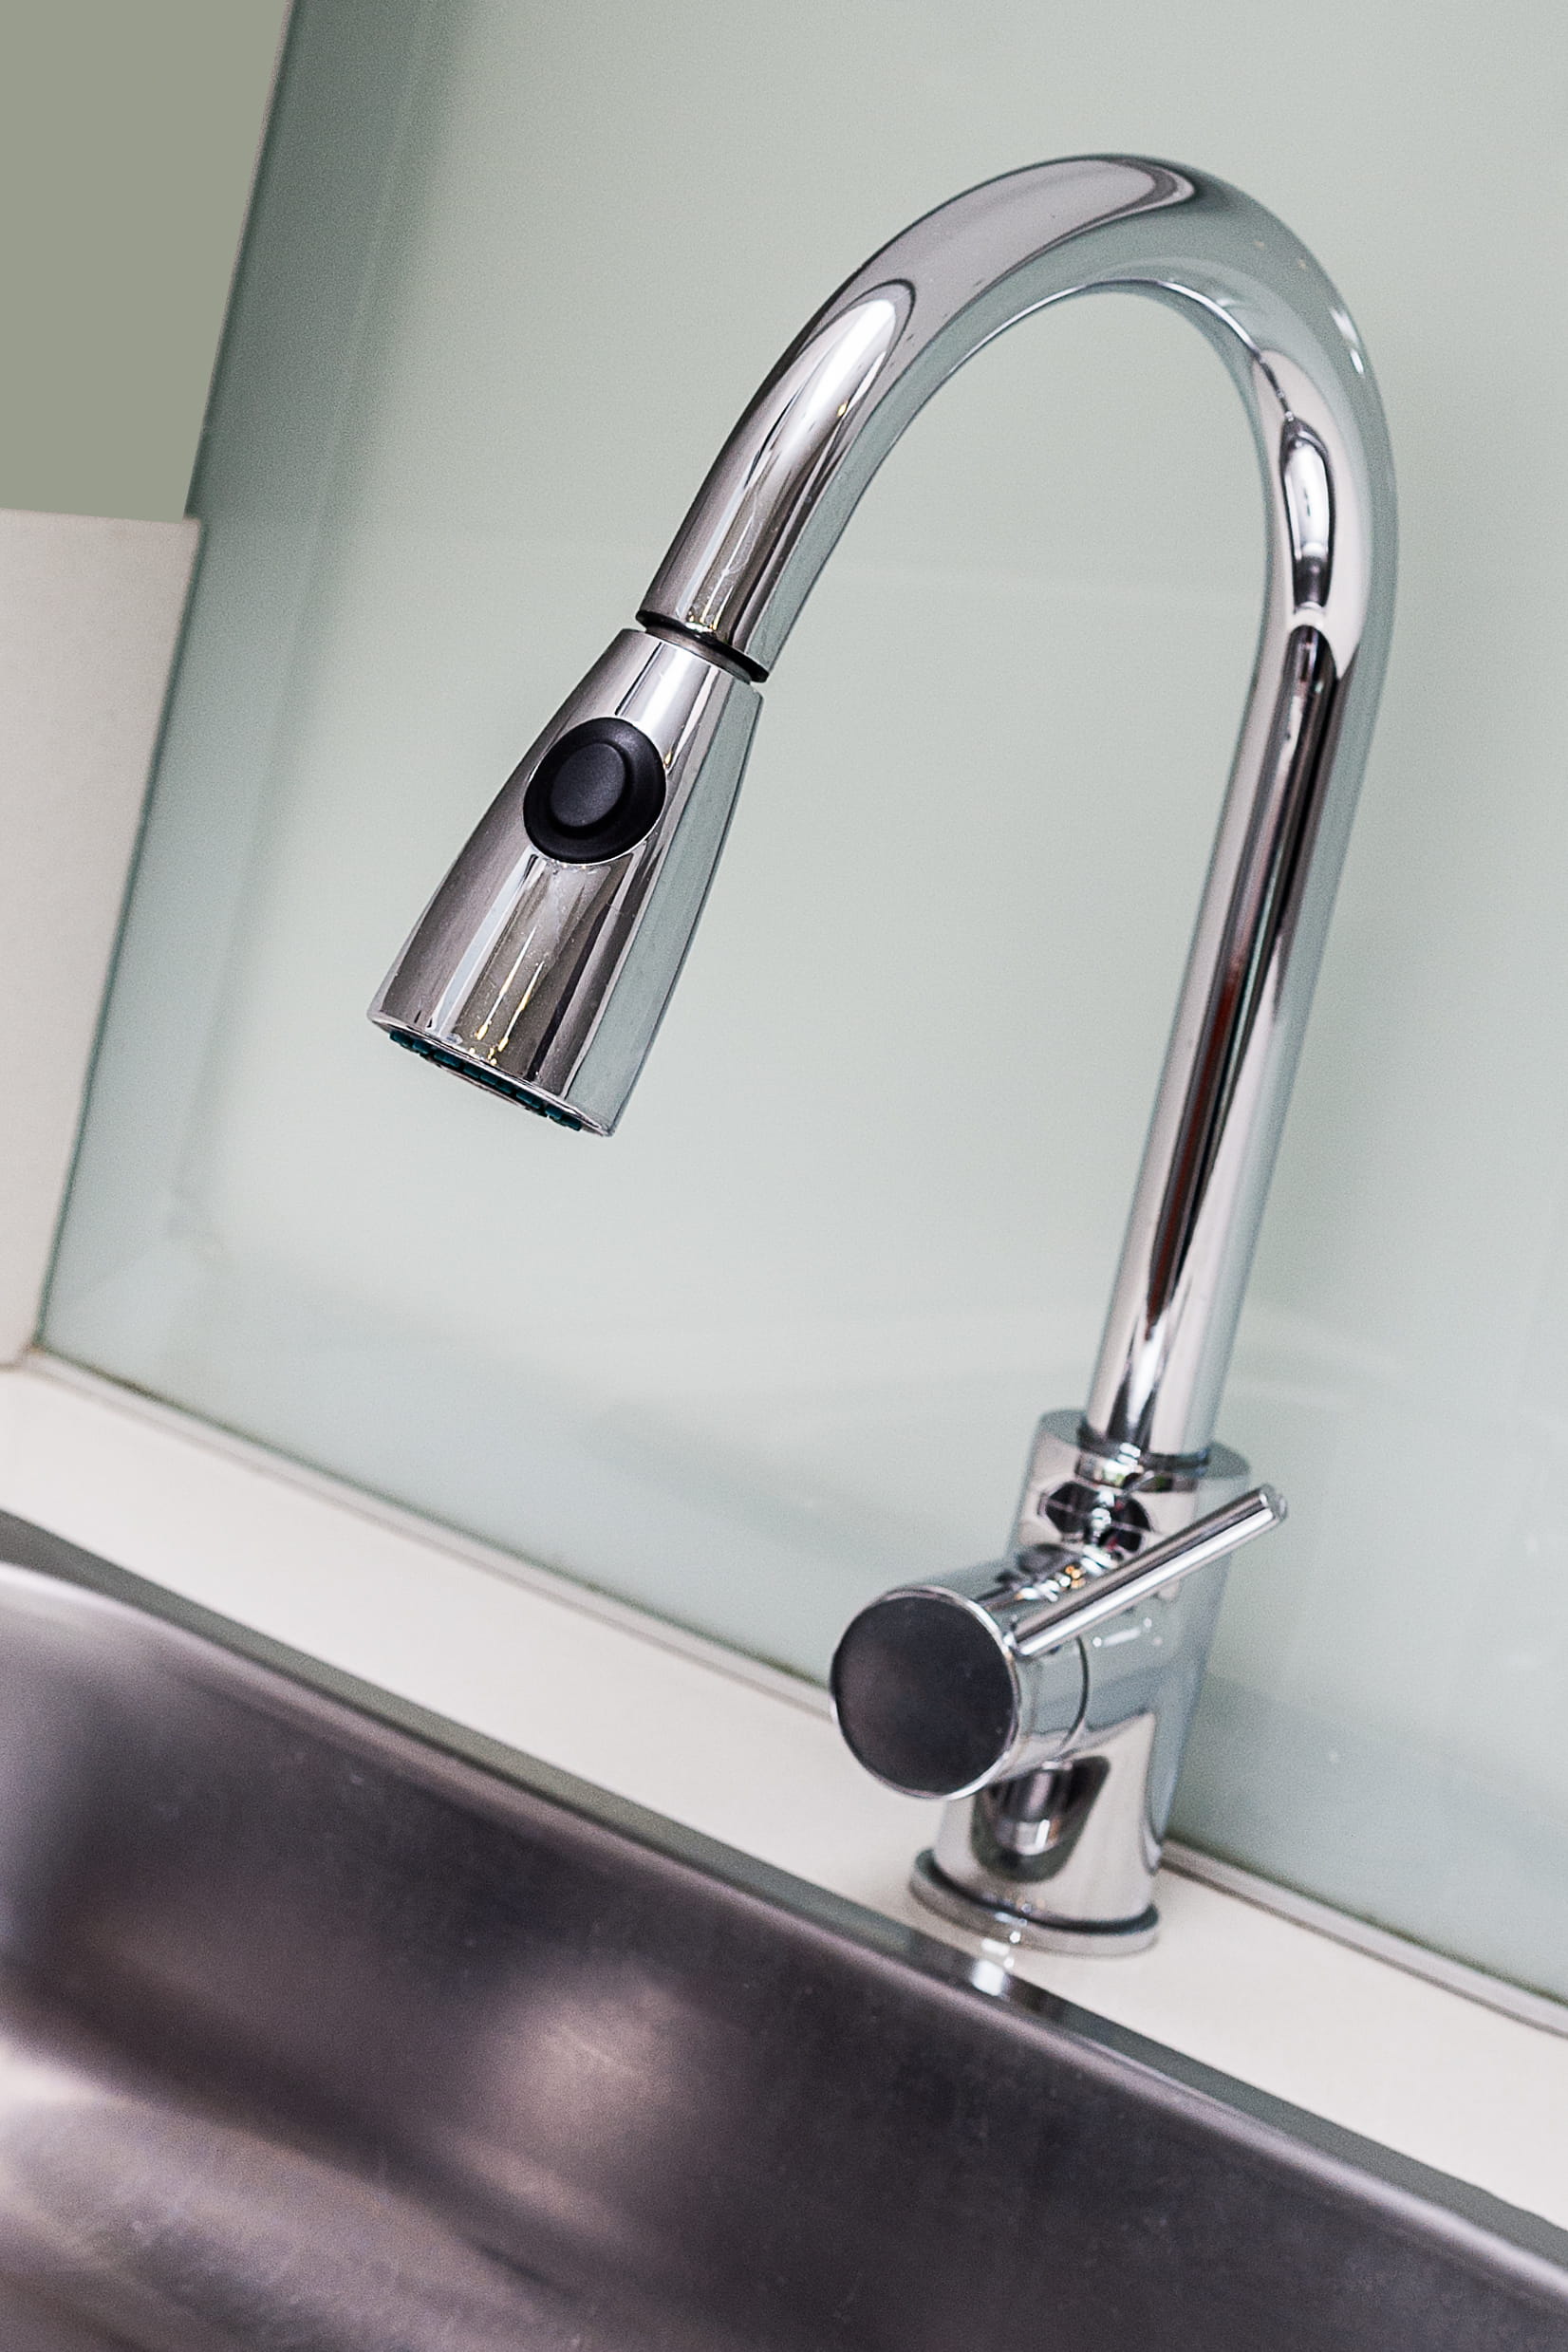 featured image - Choosing the Best Faucet Water Filter to Remove Fluoride and Chlorine